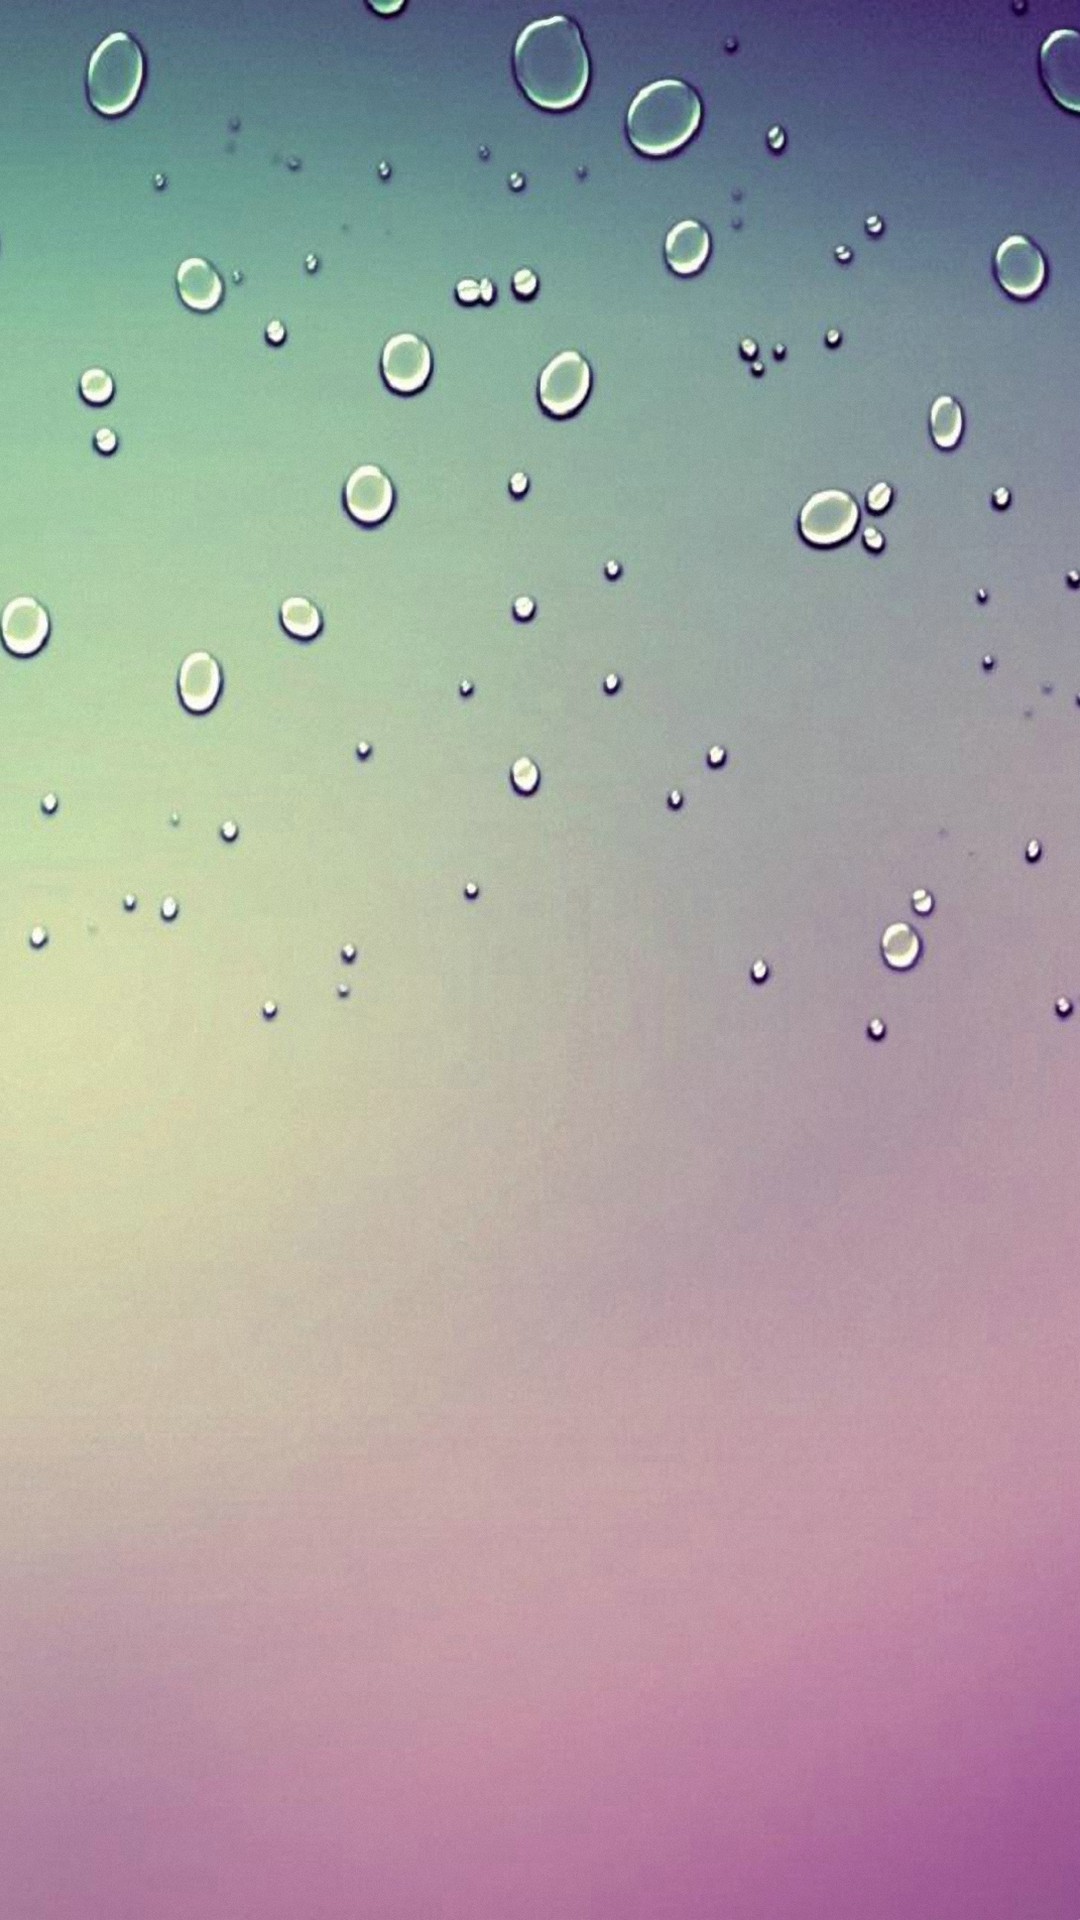 Rain Wallpaper Android With Hd Resolution - Android Wallpaper Rain - HD Wallpaper 